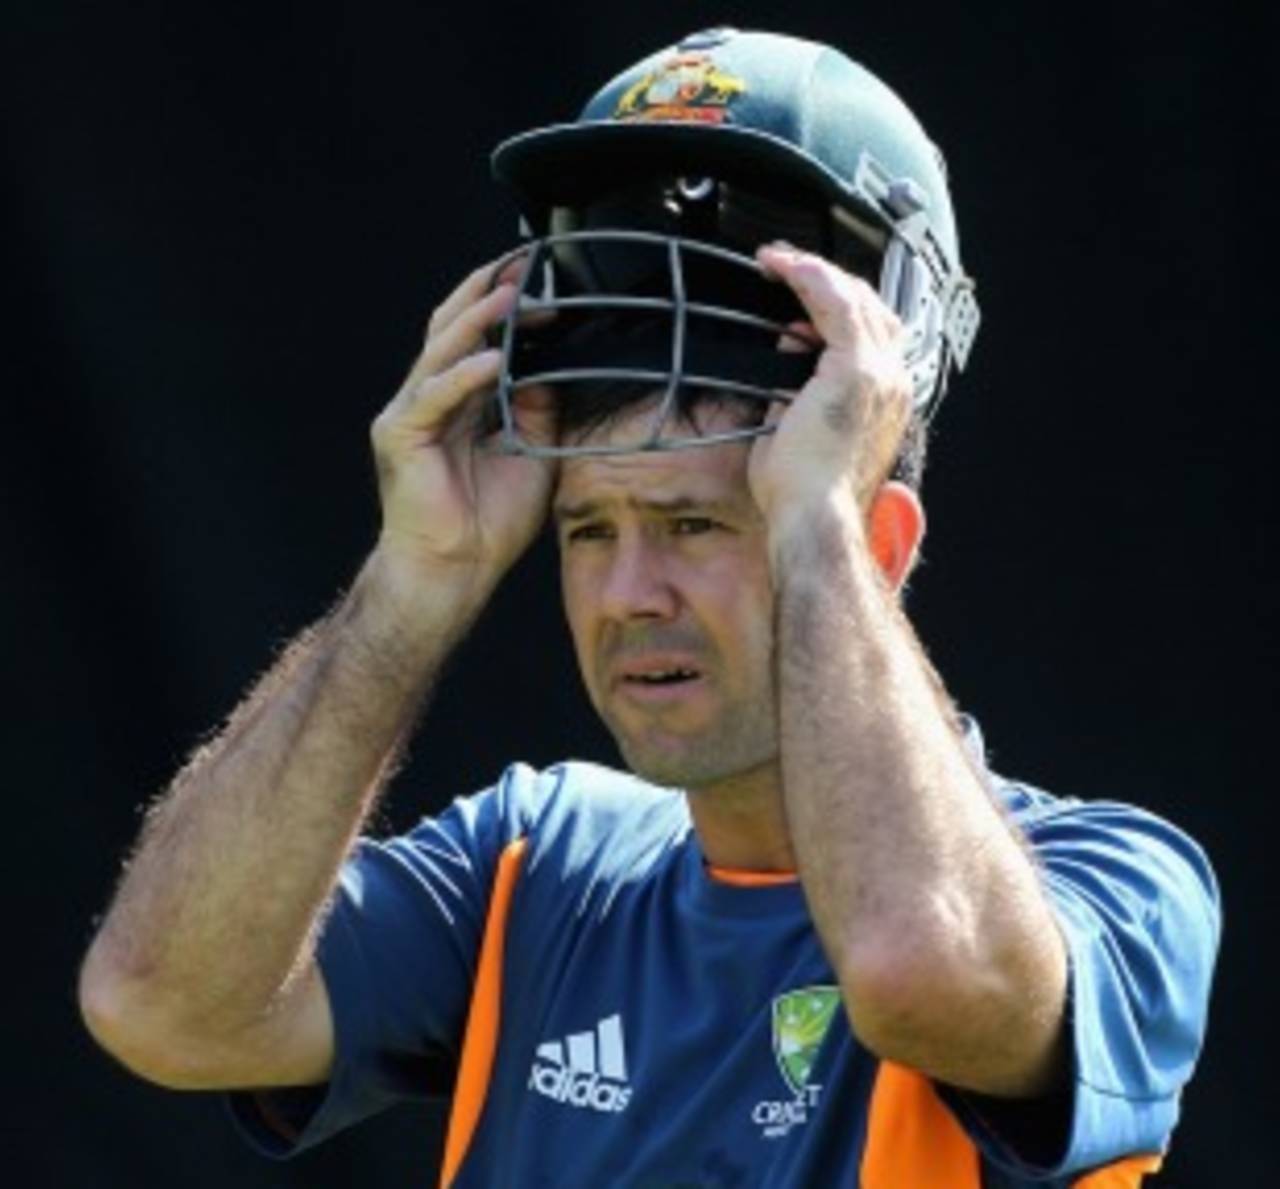 Ricky Ponting puts on his helmet during a net session, Ahmedabad, World Cup 2011, February 19, 2011